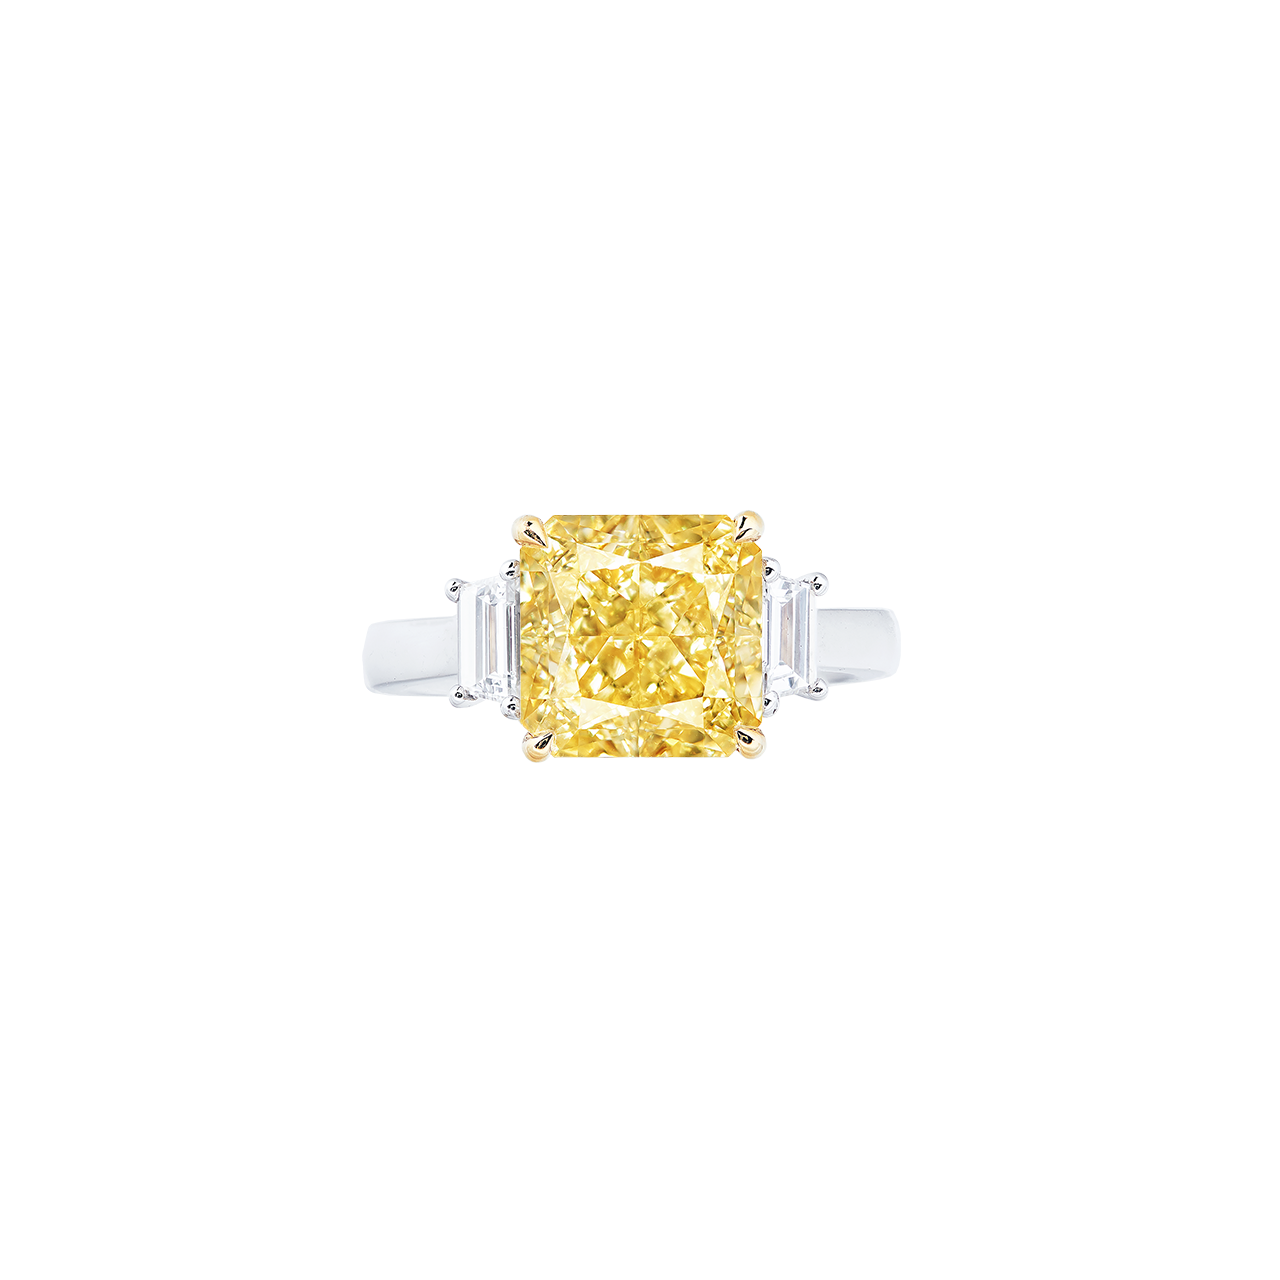 GIA 11.57克拉 棕黃彩鑽鑽石戒
FANCY BROWN YELLOW 
COLOURED DIAMOND AND 
DIAMOND RING